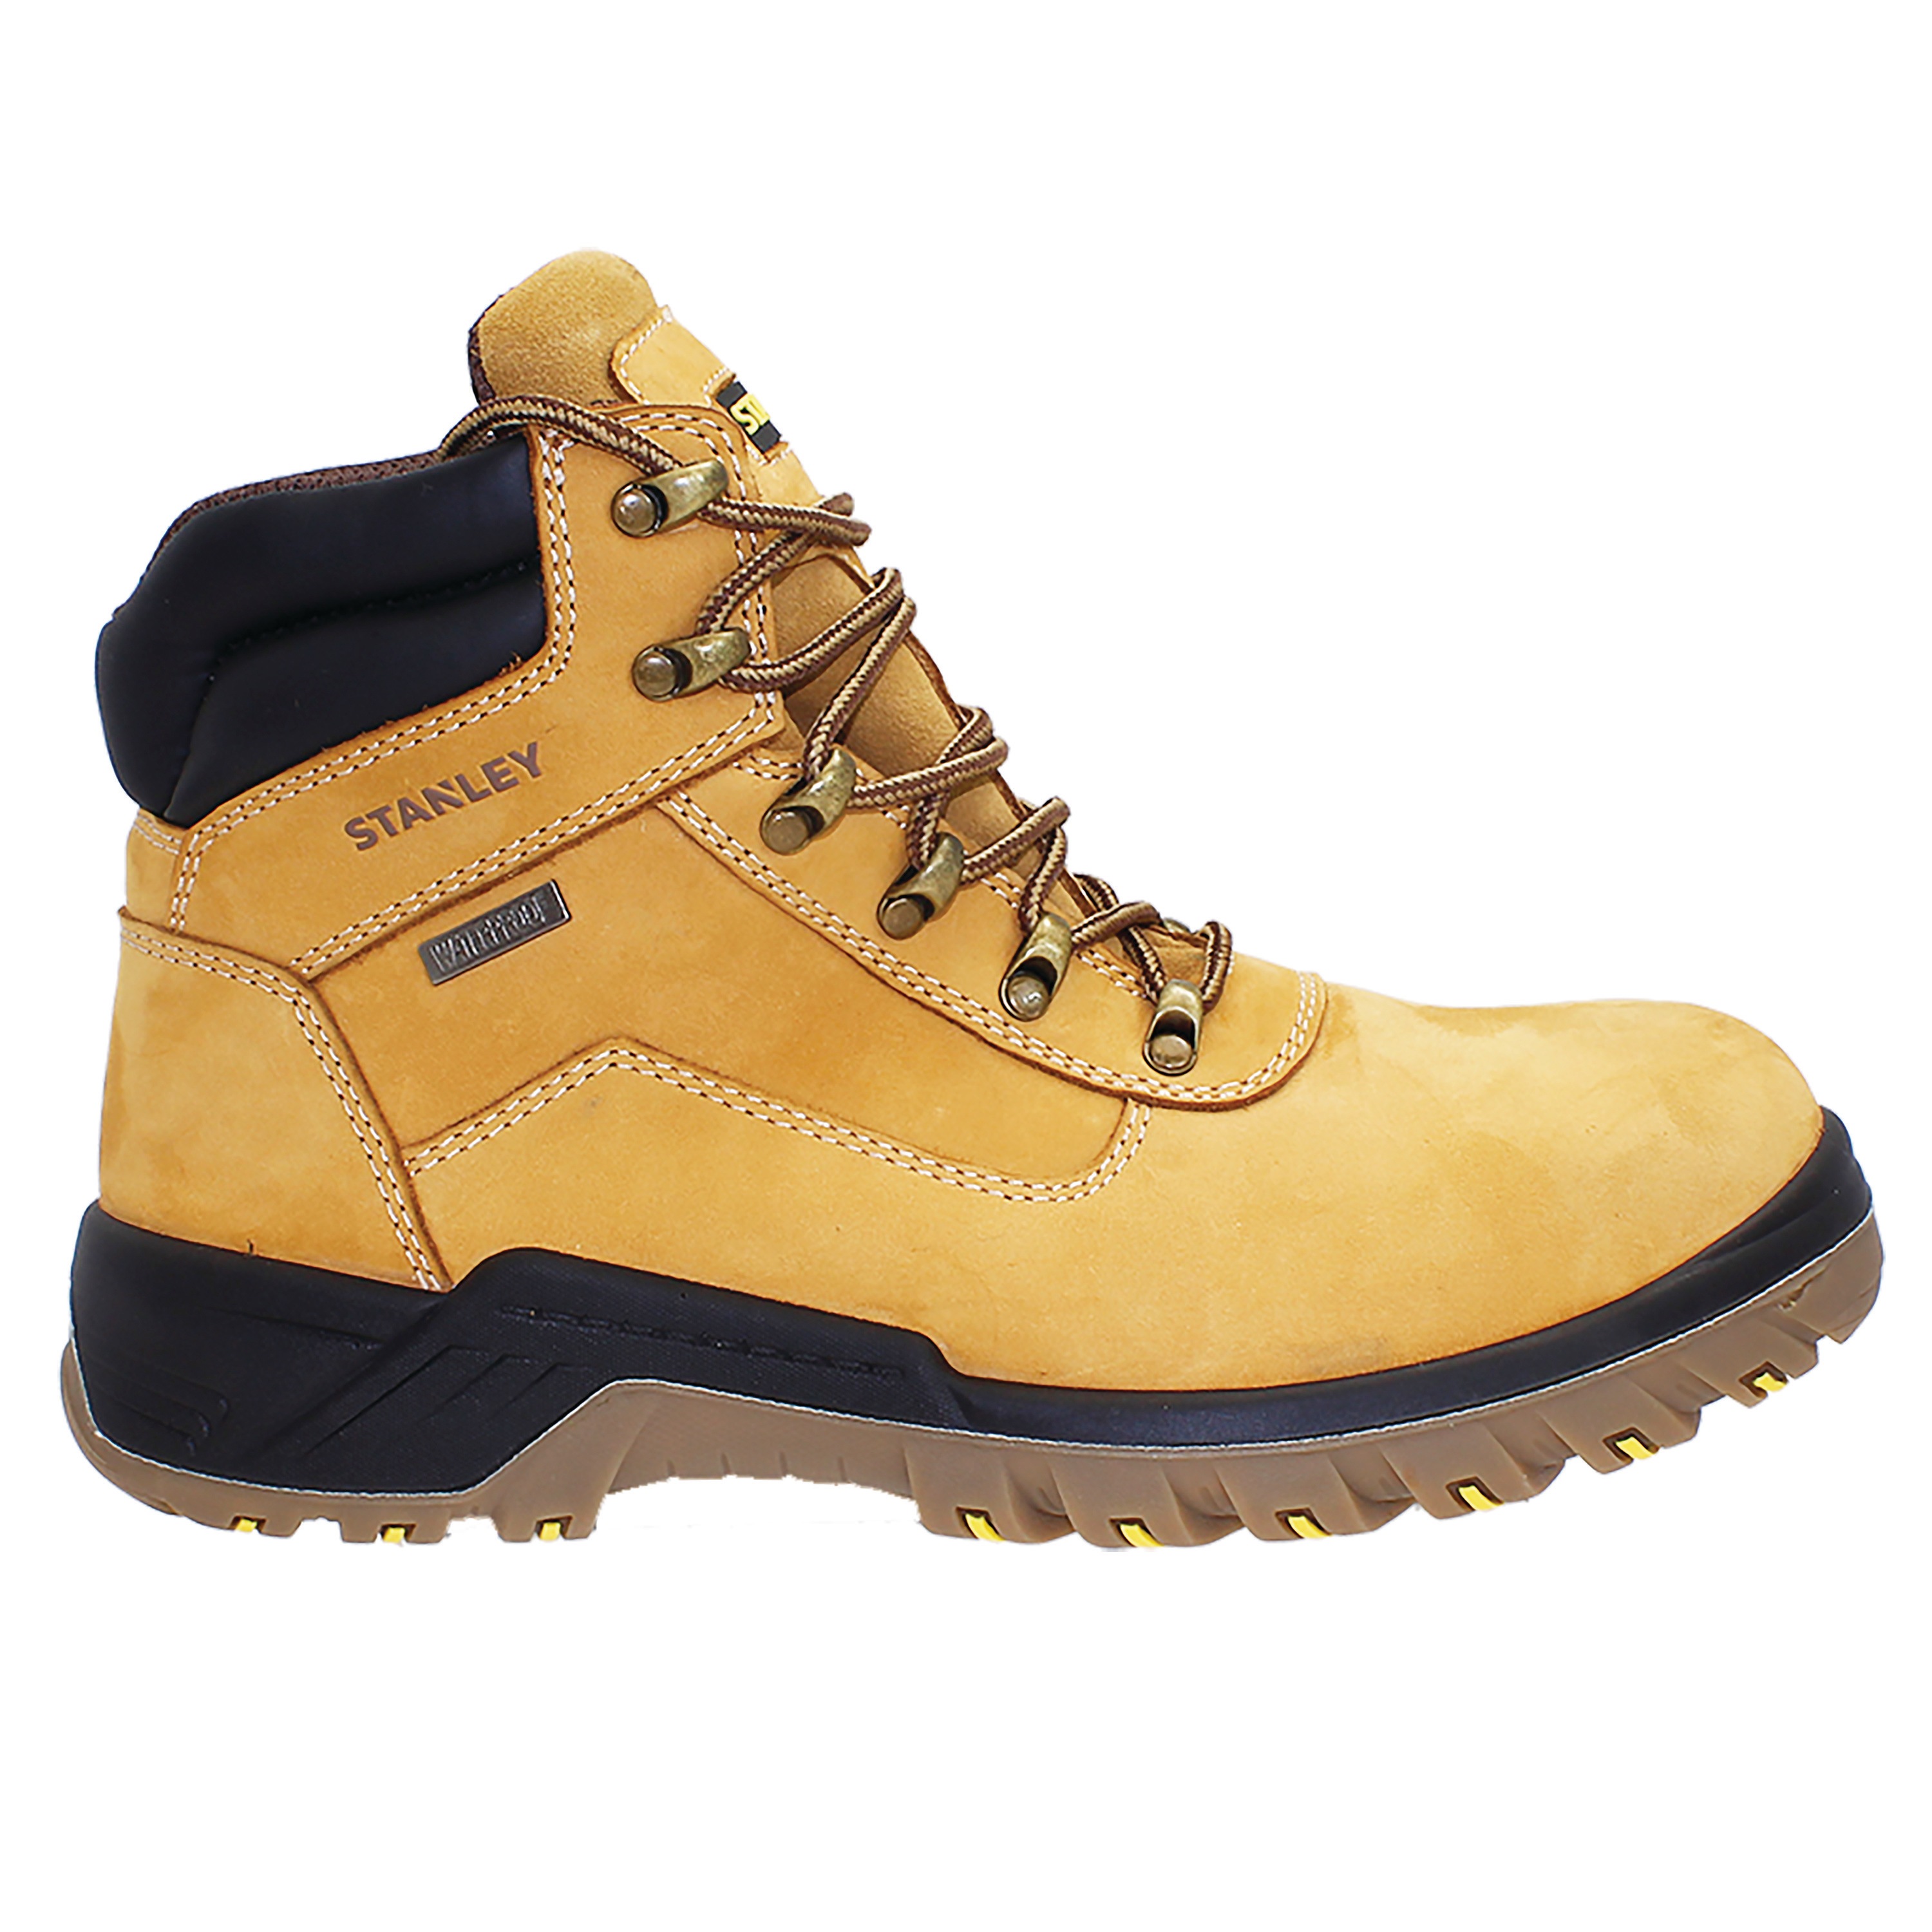 stanley work boots near me